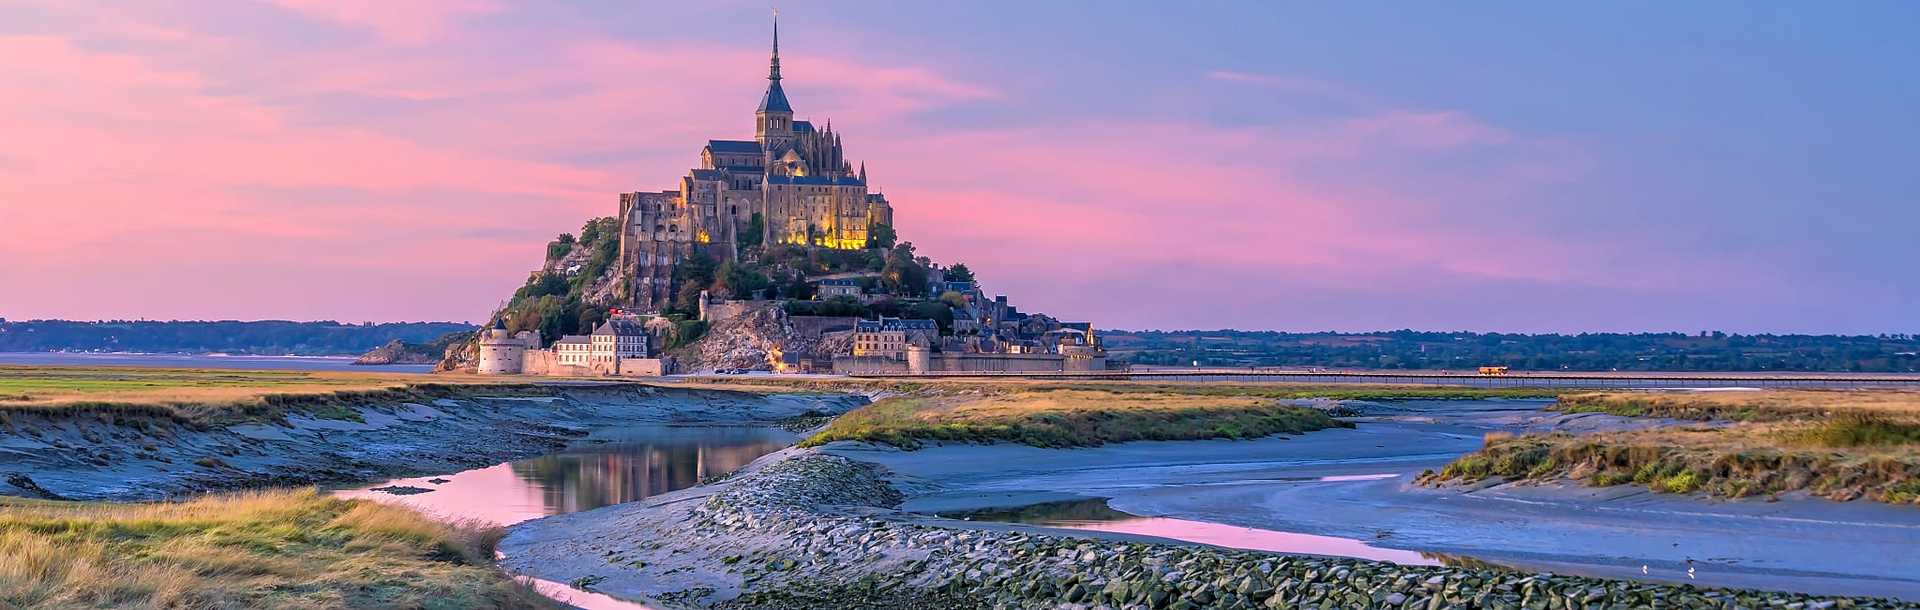 Mont Saint Michel in the Normandy region of France